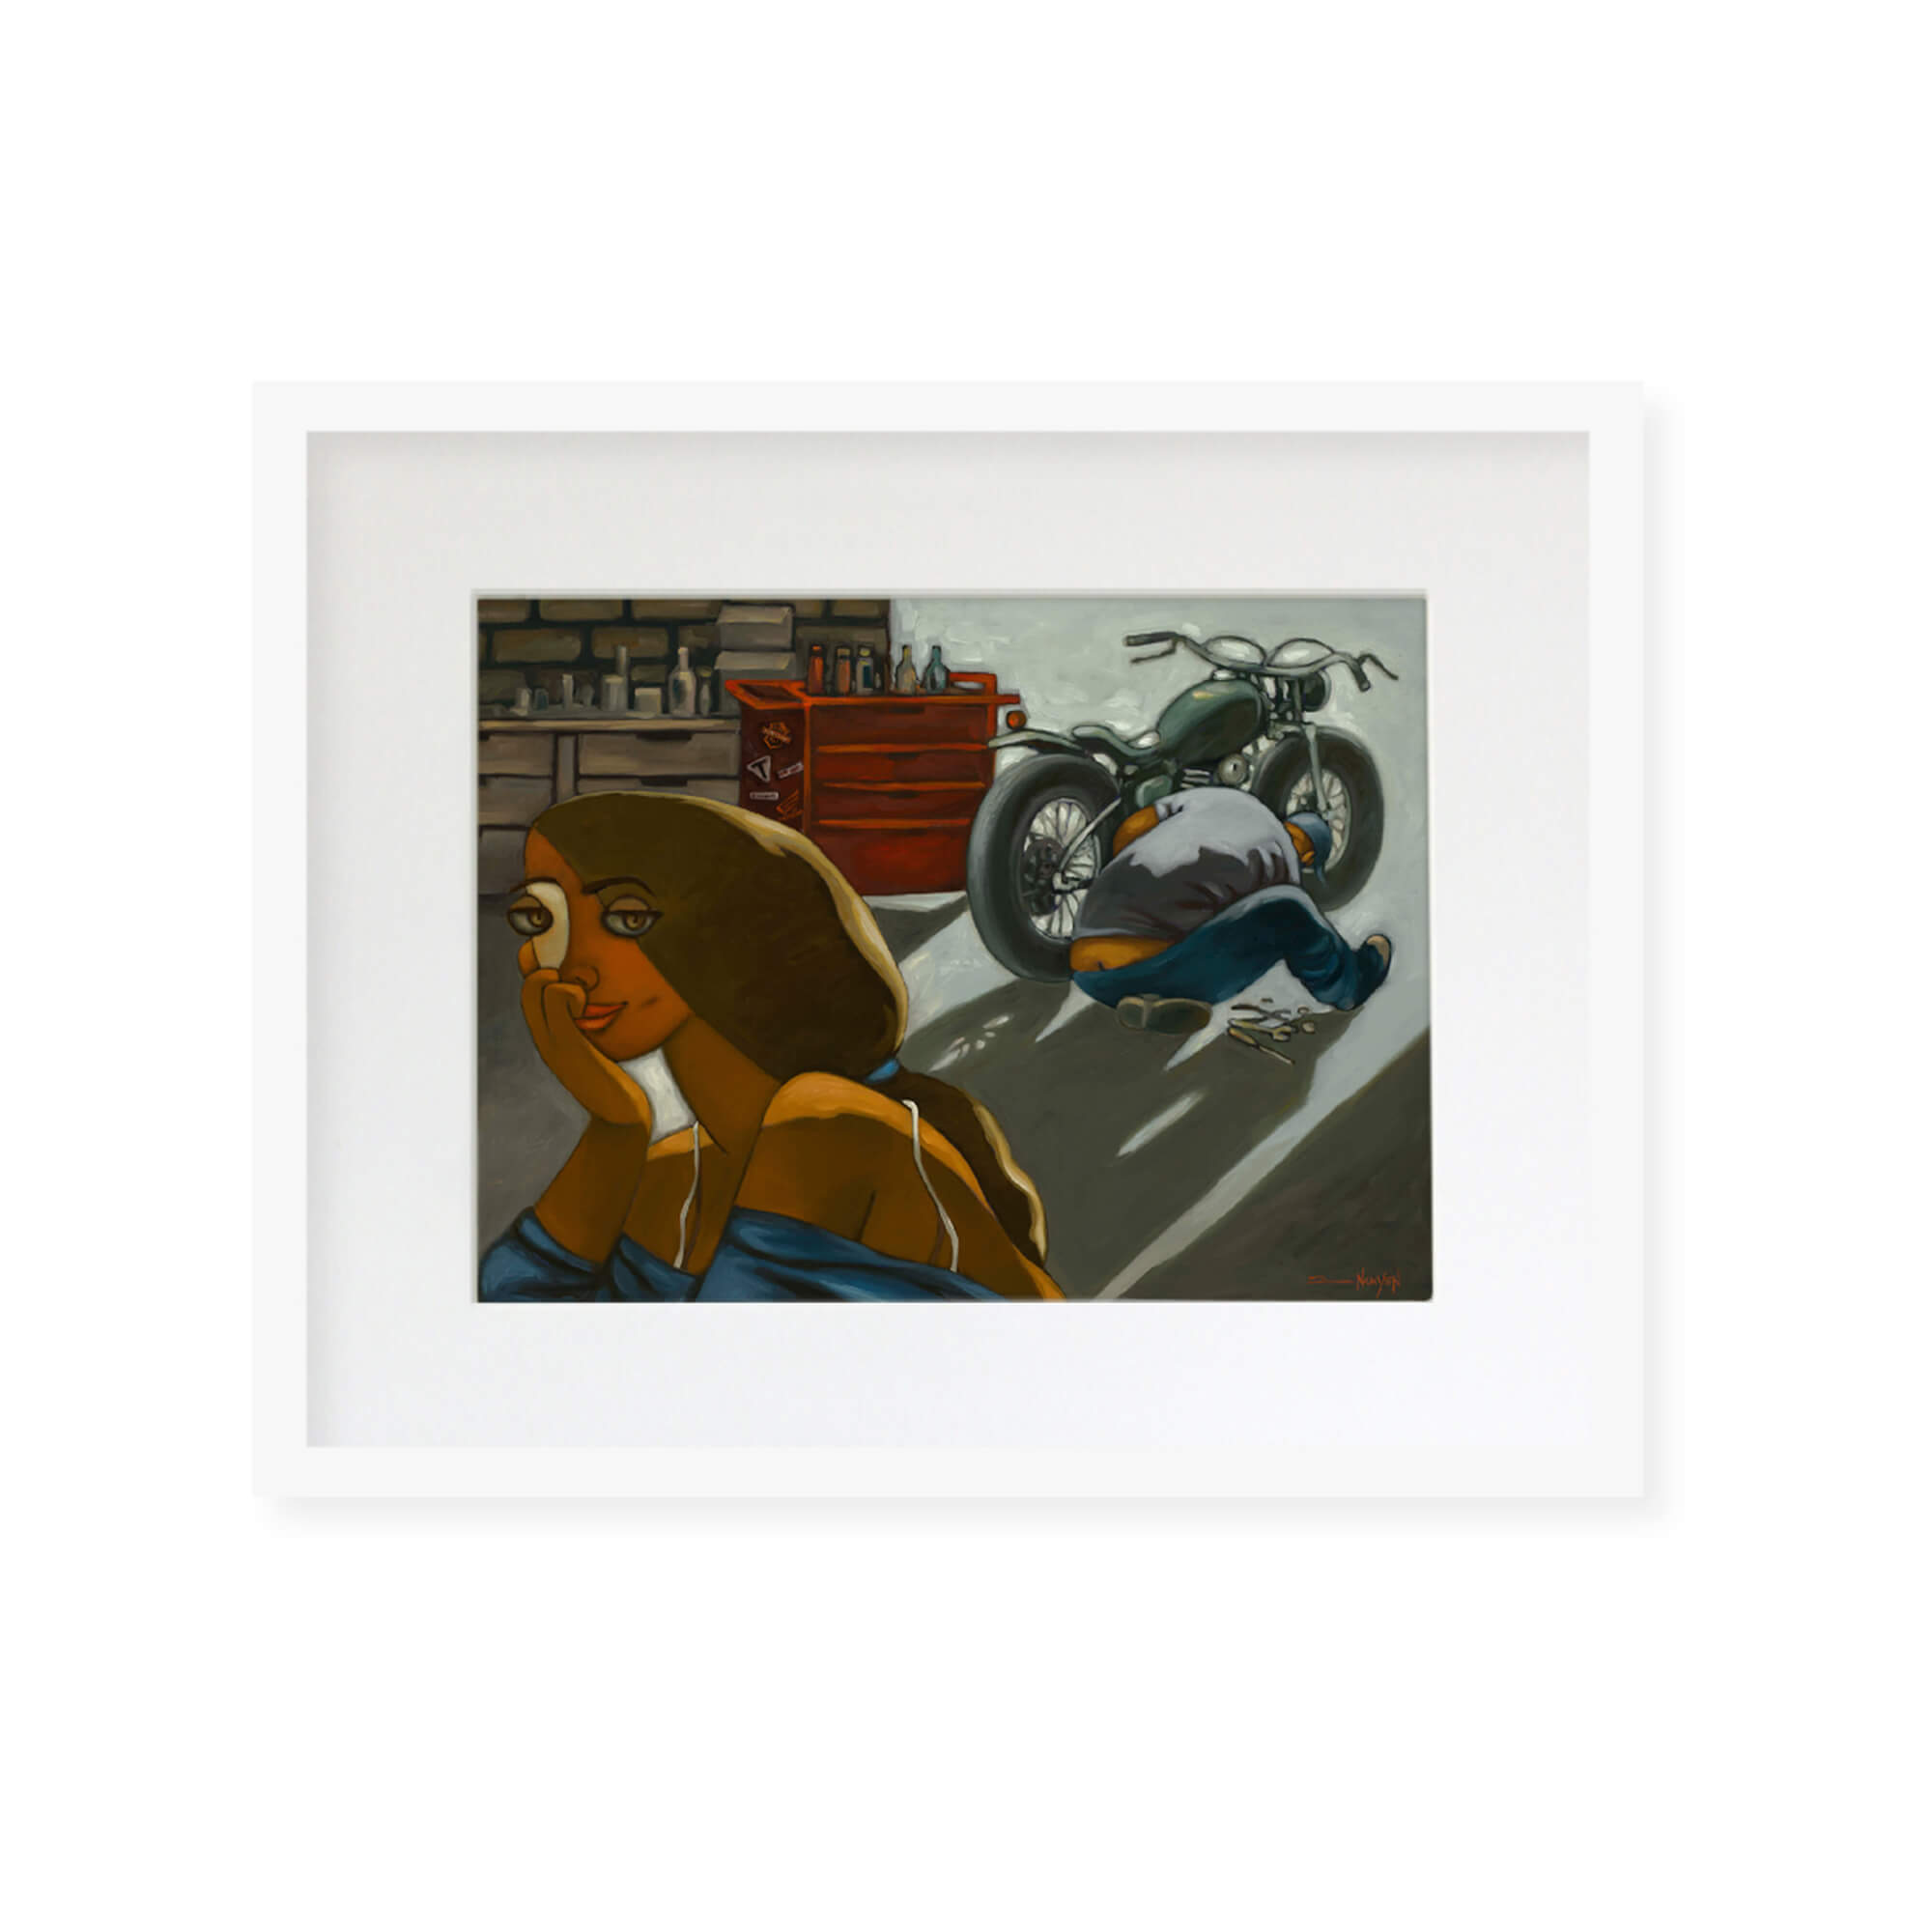 Framed matted art print of a woman waiting for her vintage motorcycle to be fixed by Hawaii artist Tim Nguyen